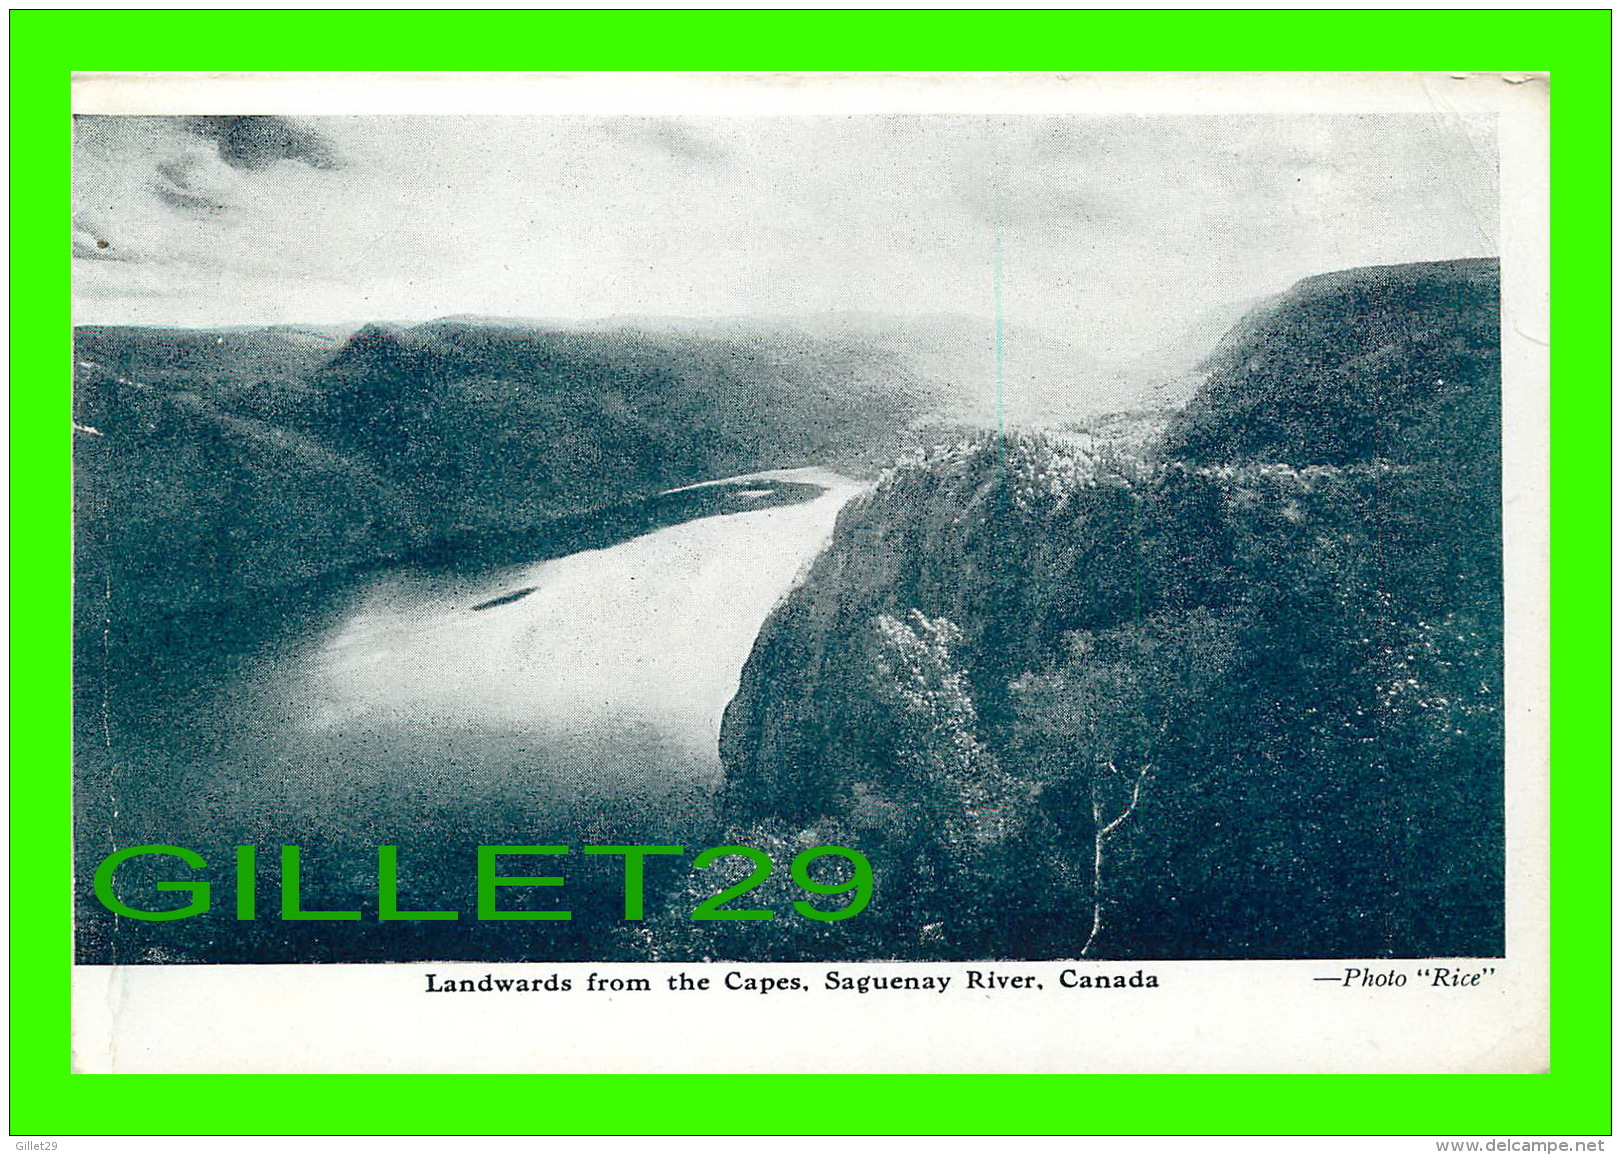 SAGUENAY, QUÉBEC - LANDWARDS FROM THE CAPES, SAGUENAY RIVER - PHOTO RICE - PUB. BY FEDERATED PRESS LTD - WRITTEN - - Saguenay